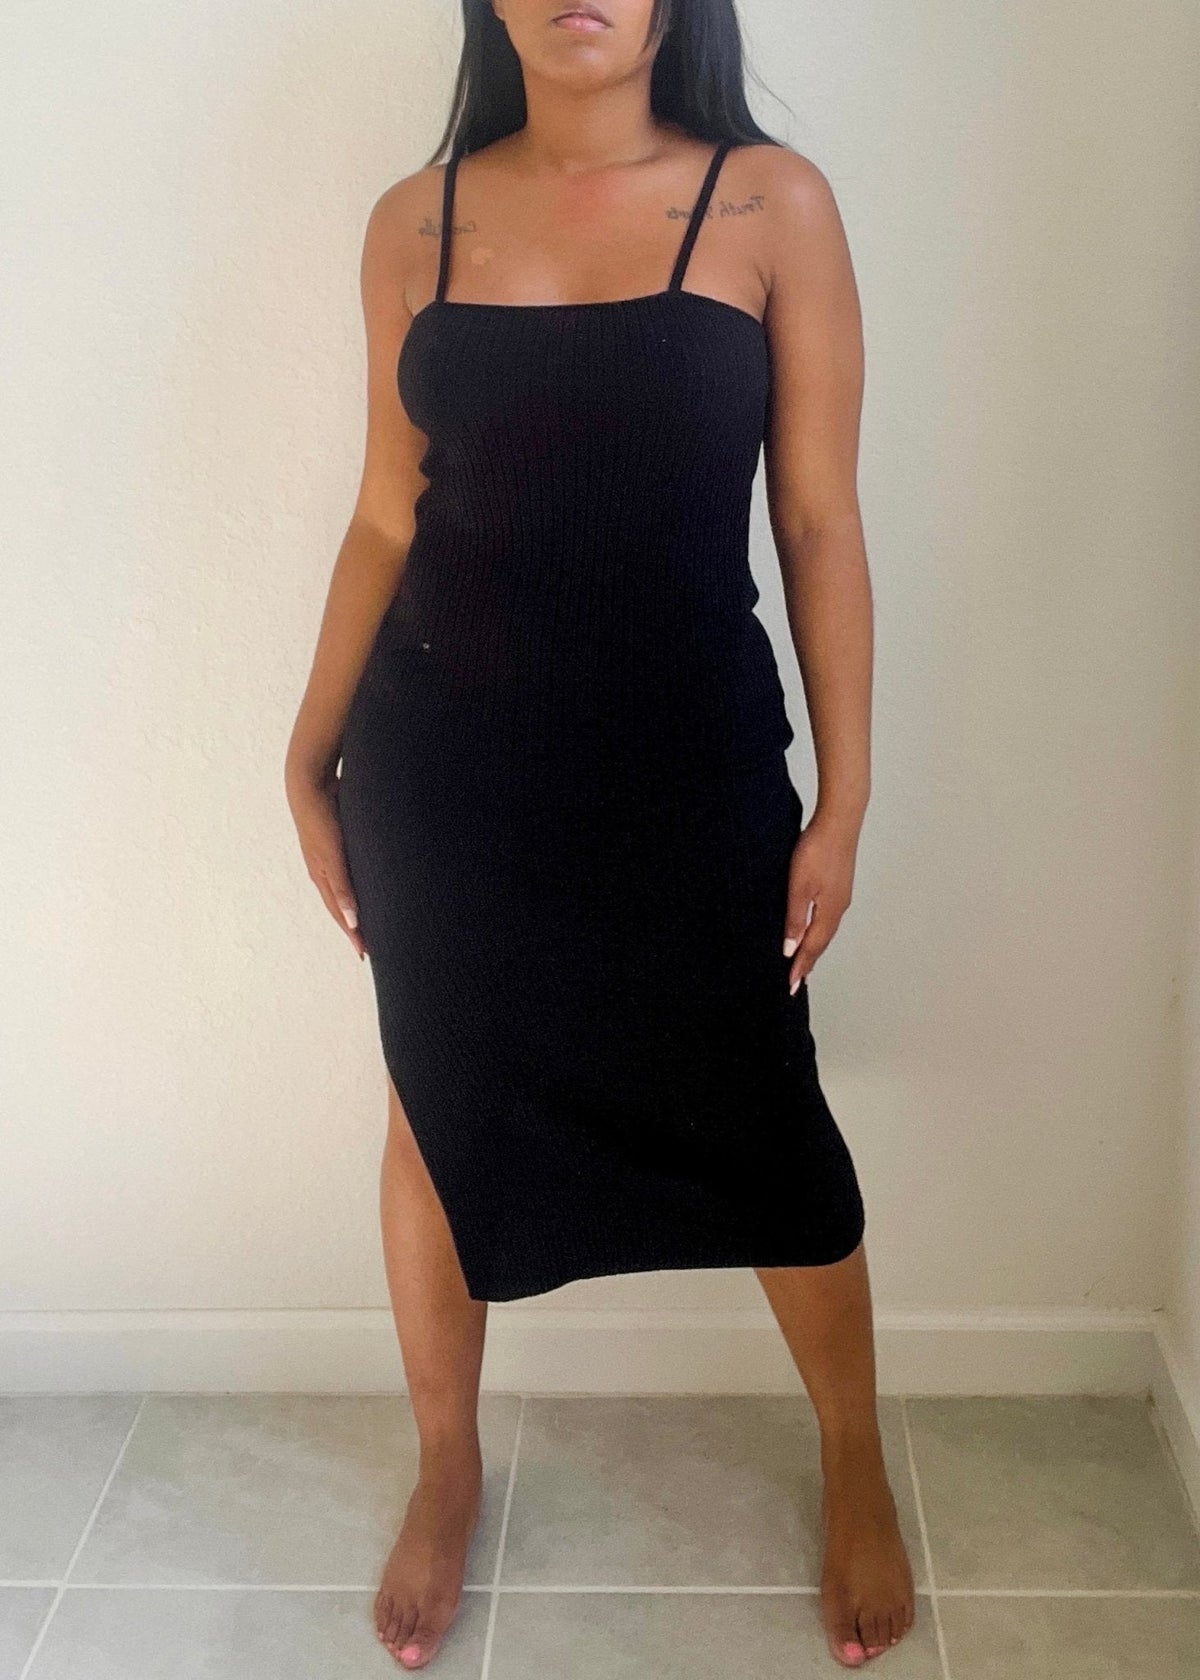 Get trendy with Basic Ribbed Dress - Dresses available at ELLE TENAJ. Grab yours for $25.0 today!